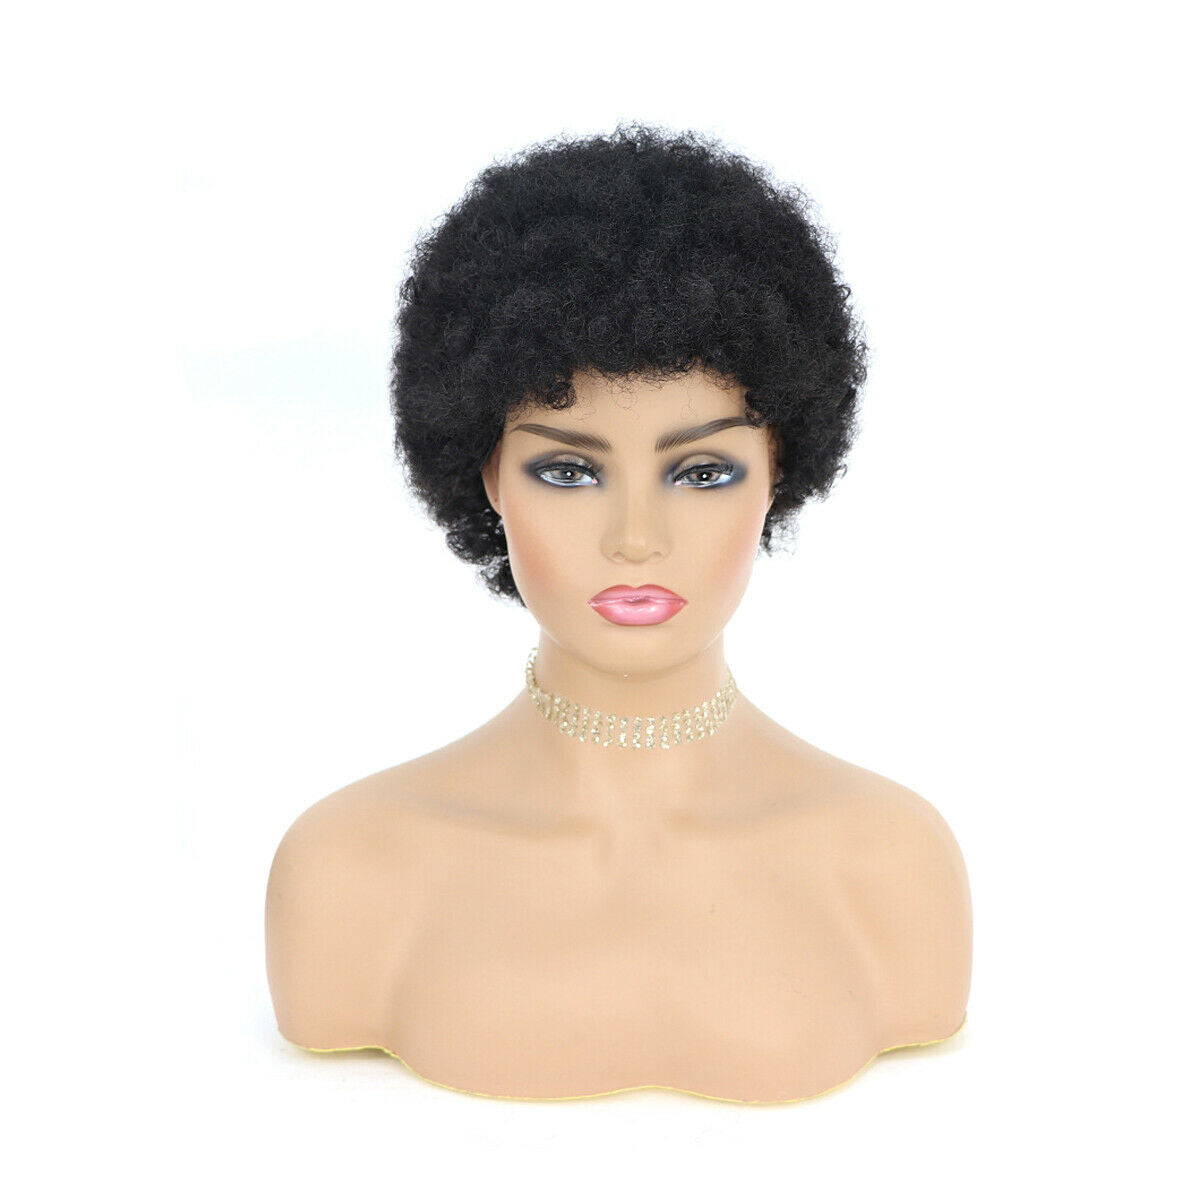 100% Human Hair Afro Kinky Curly Hair Wigs for Black Women African American Wigs